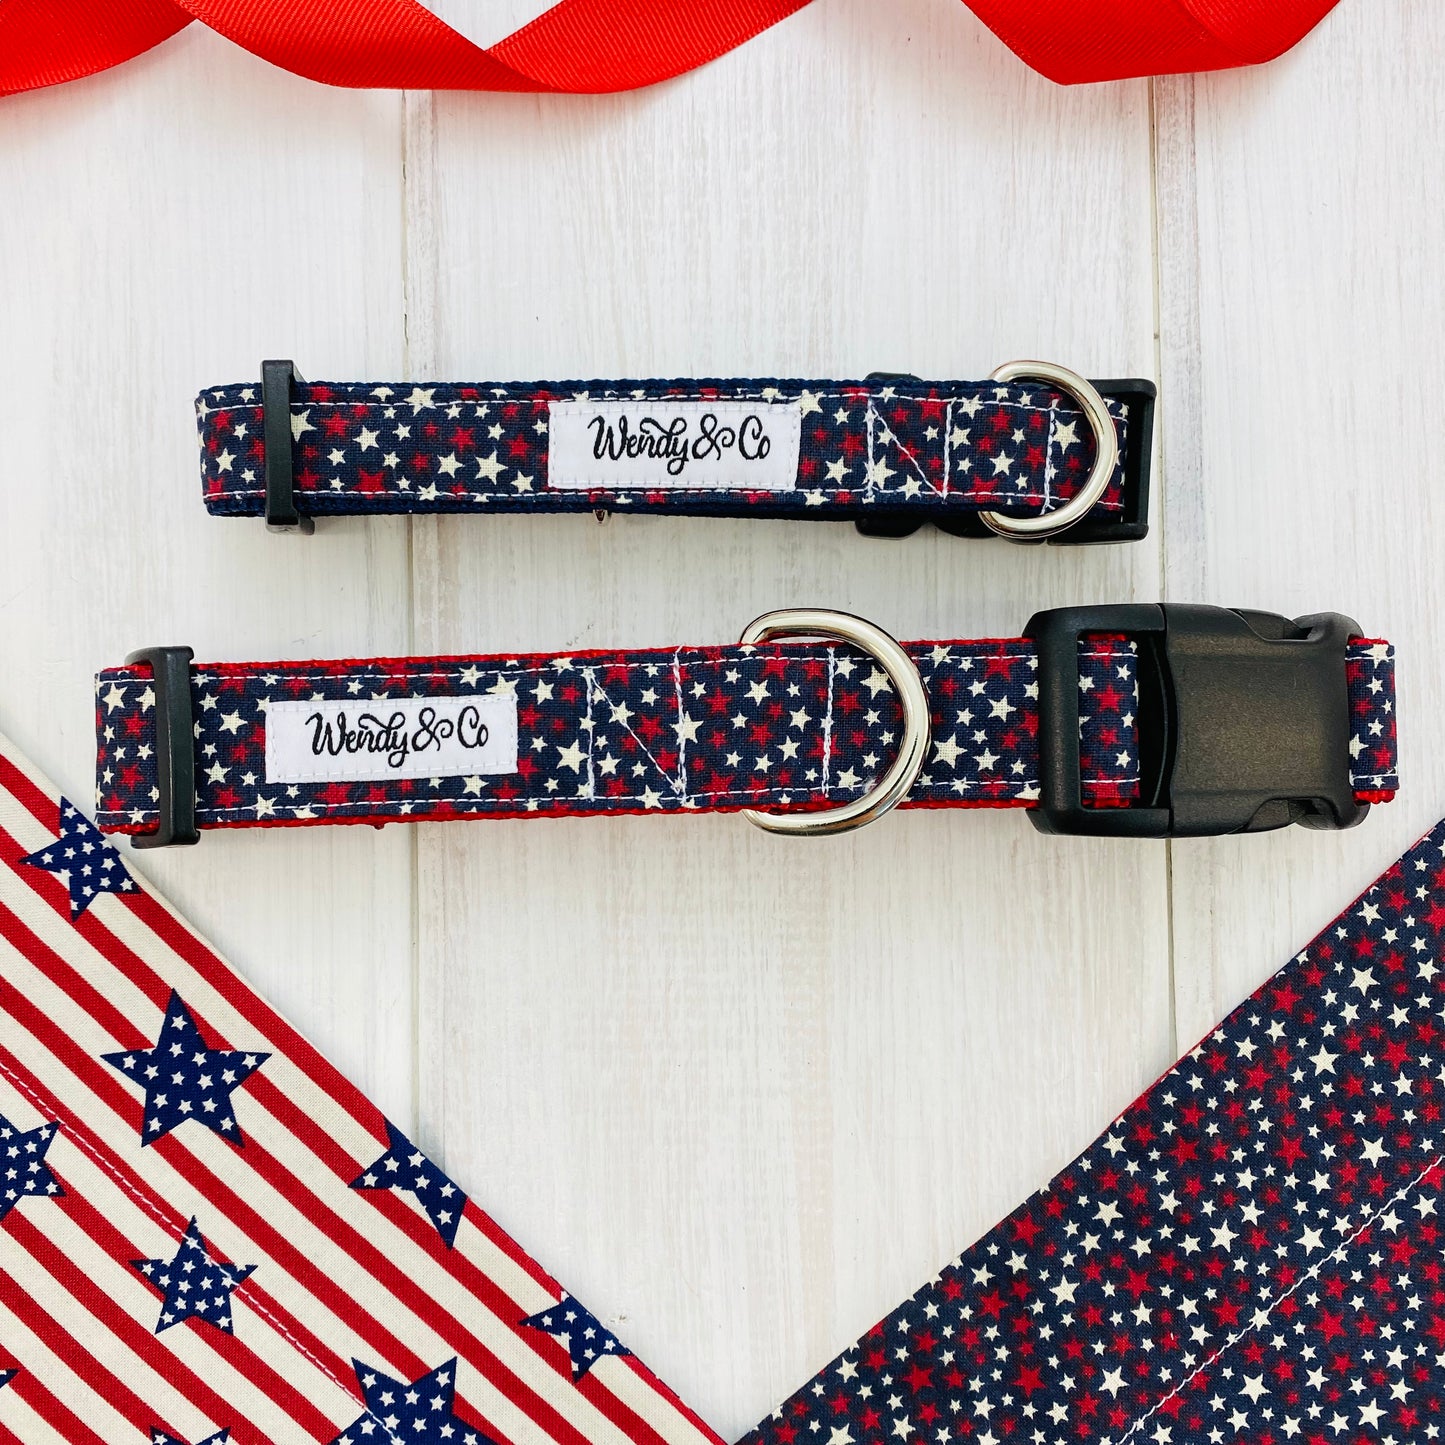 Our matching dog collars- red webbing with navy fabric covered in cream and red stars.